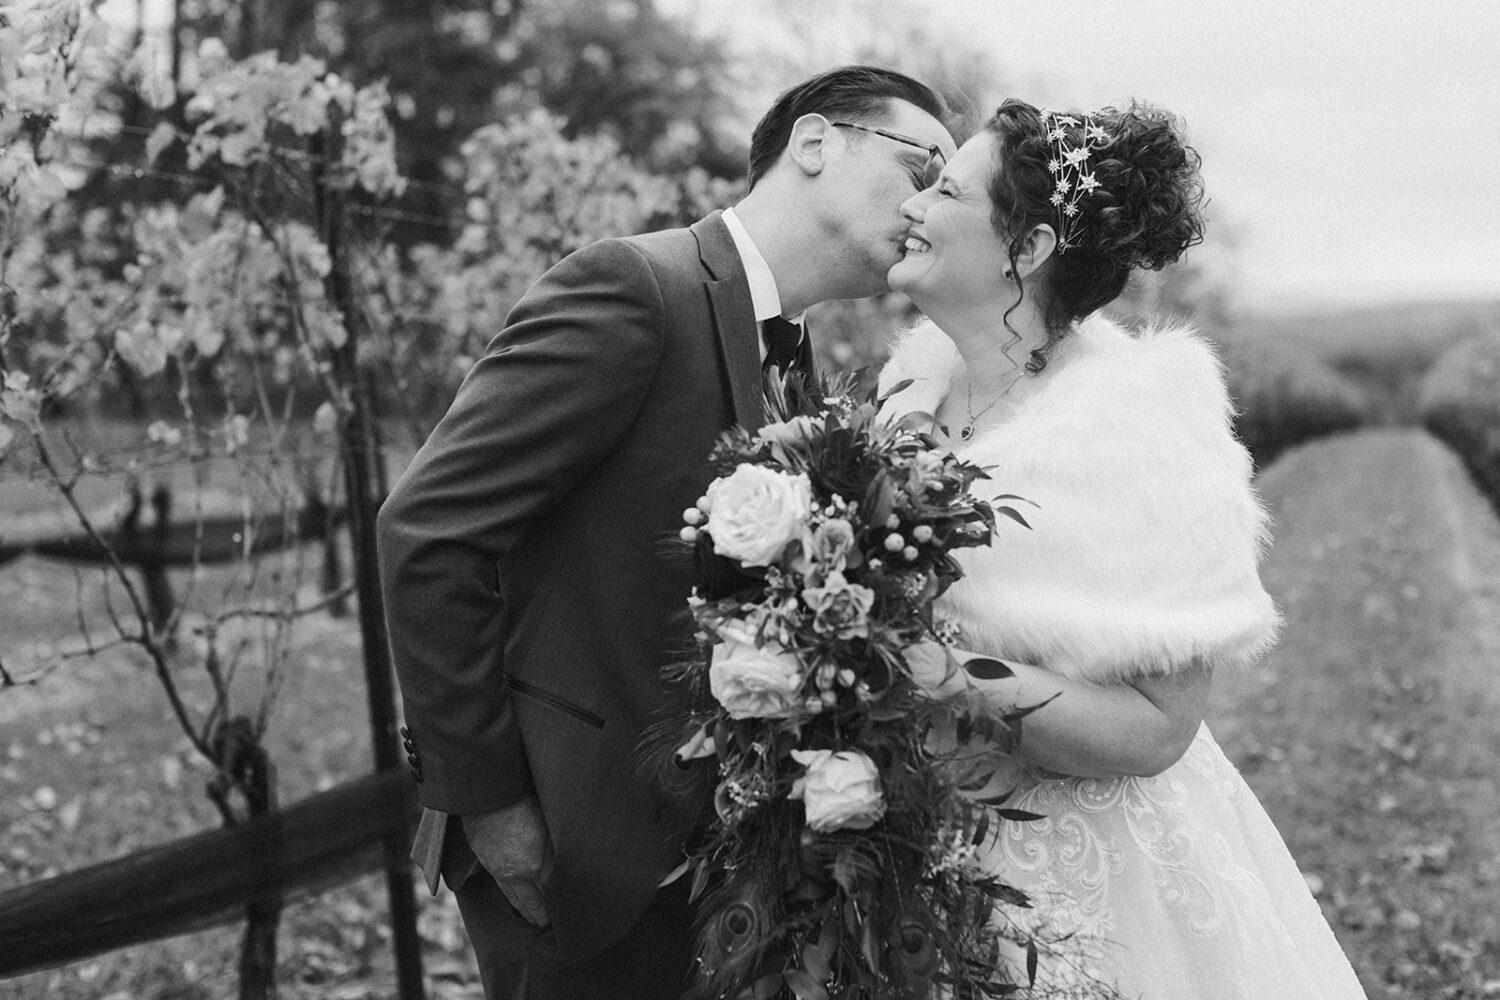 couple kisses at outdoor vineyard wedding following wedding planning tips and advice